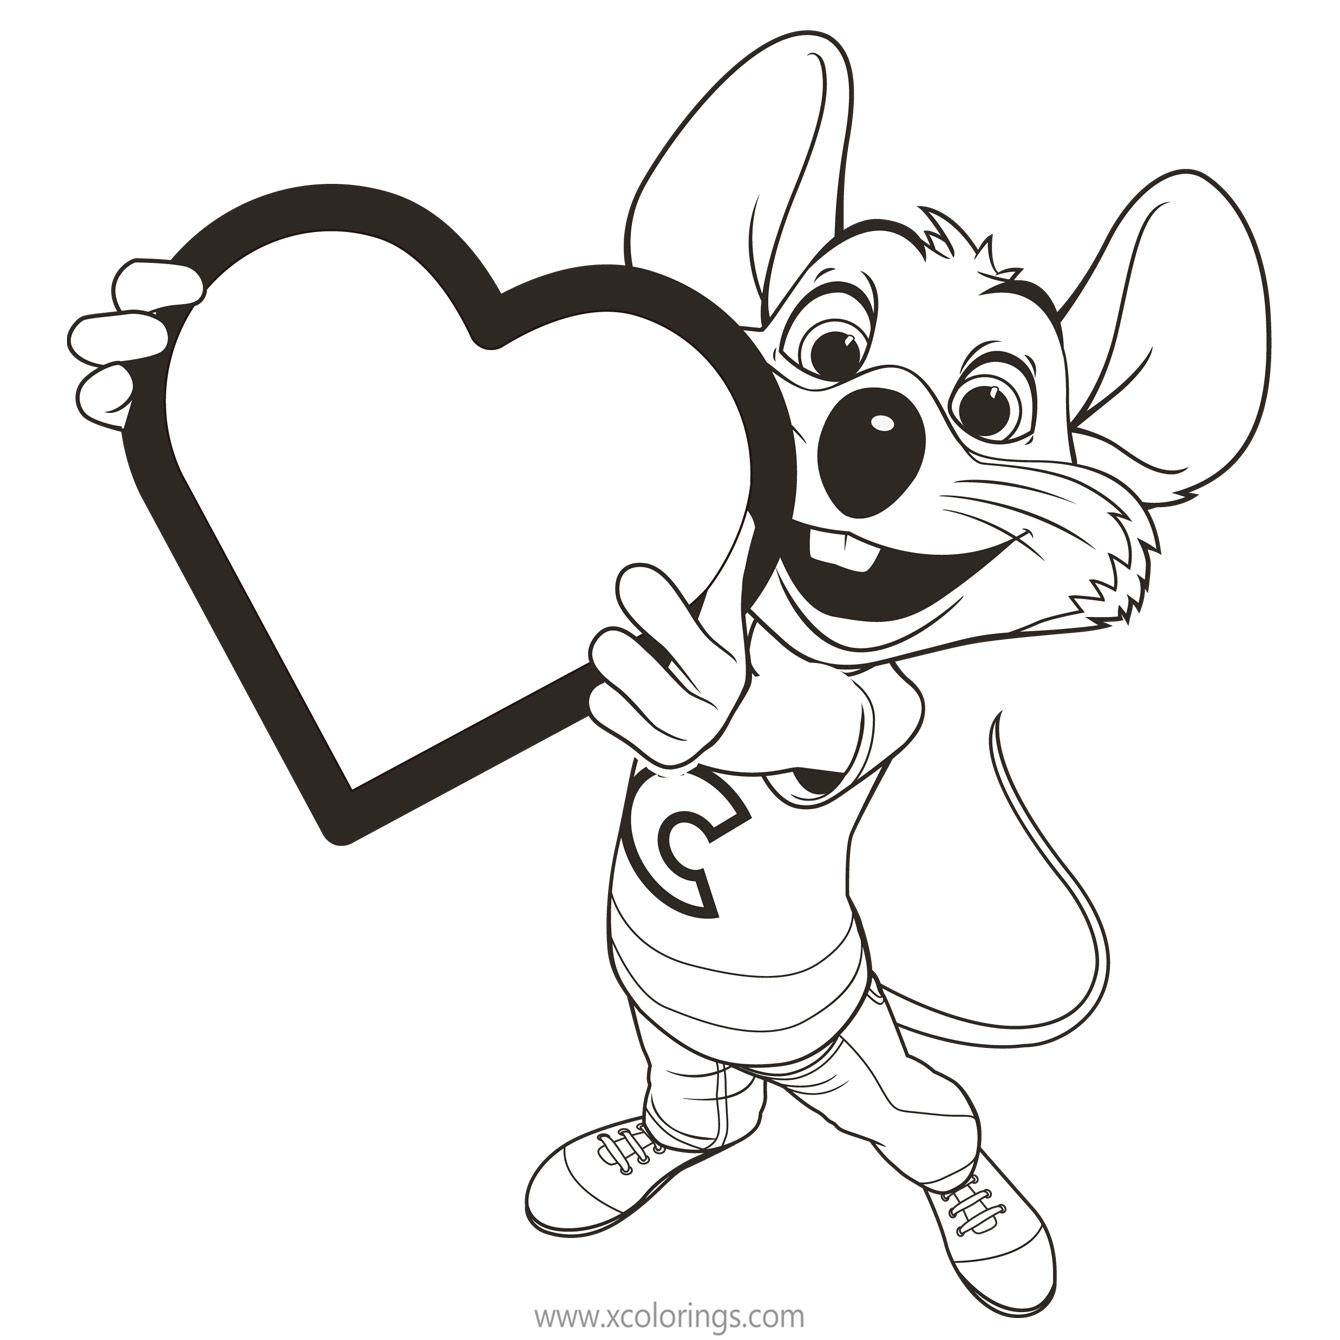 Free Chuck E Cheese Coloring Pages Valentine's Day printable